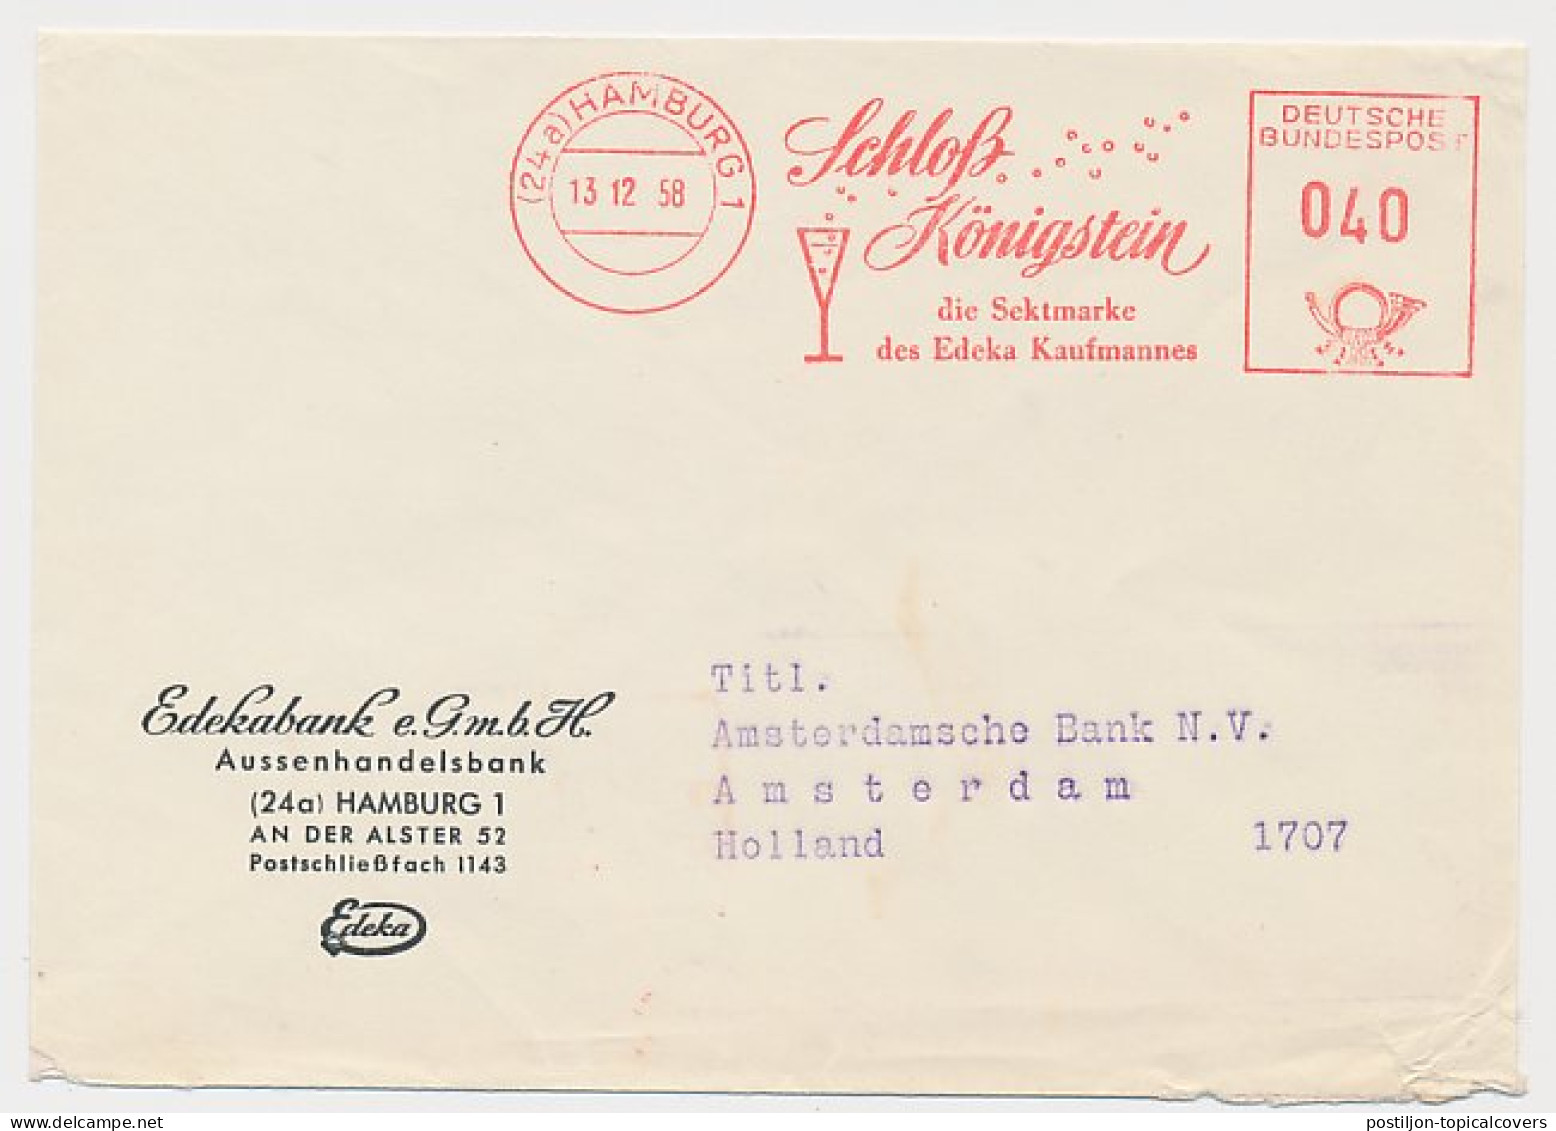 Meter Cover Germany 1958s Sekt - Champagne - Schloss Konigstein - Wines & Alcohols